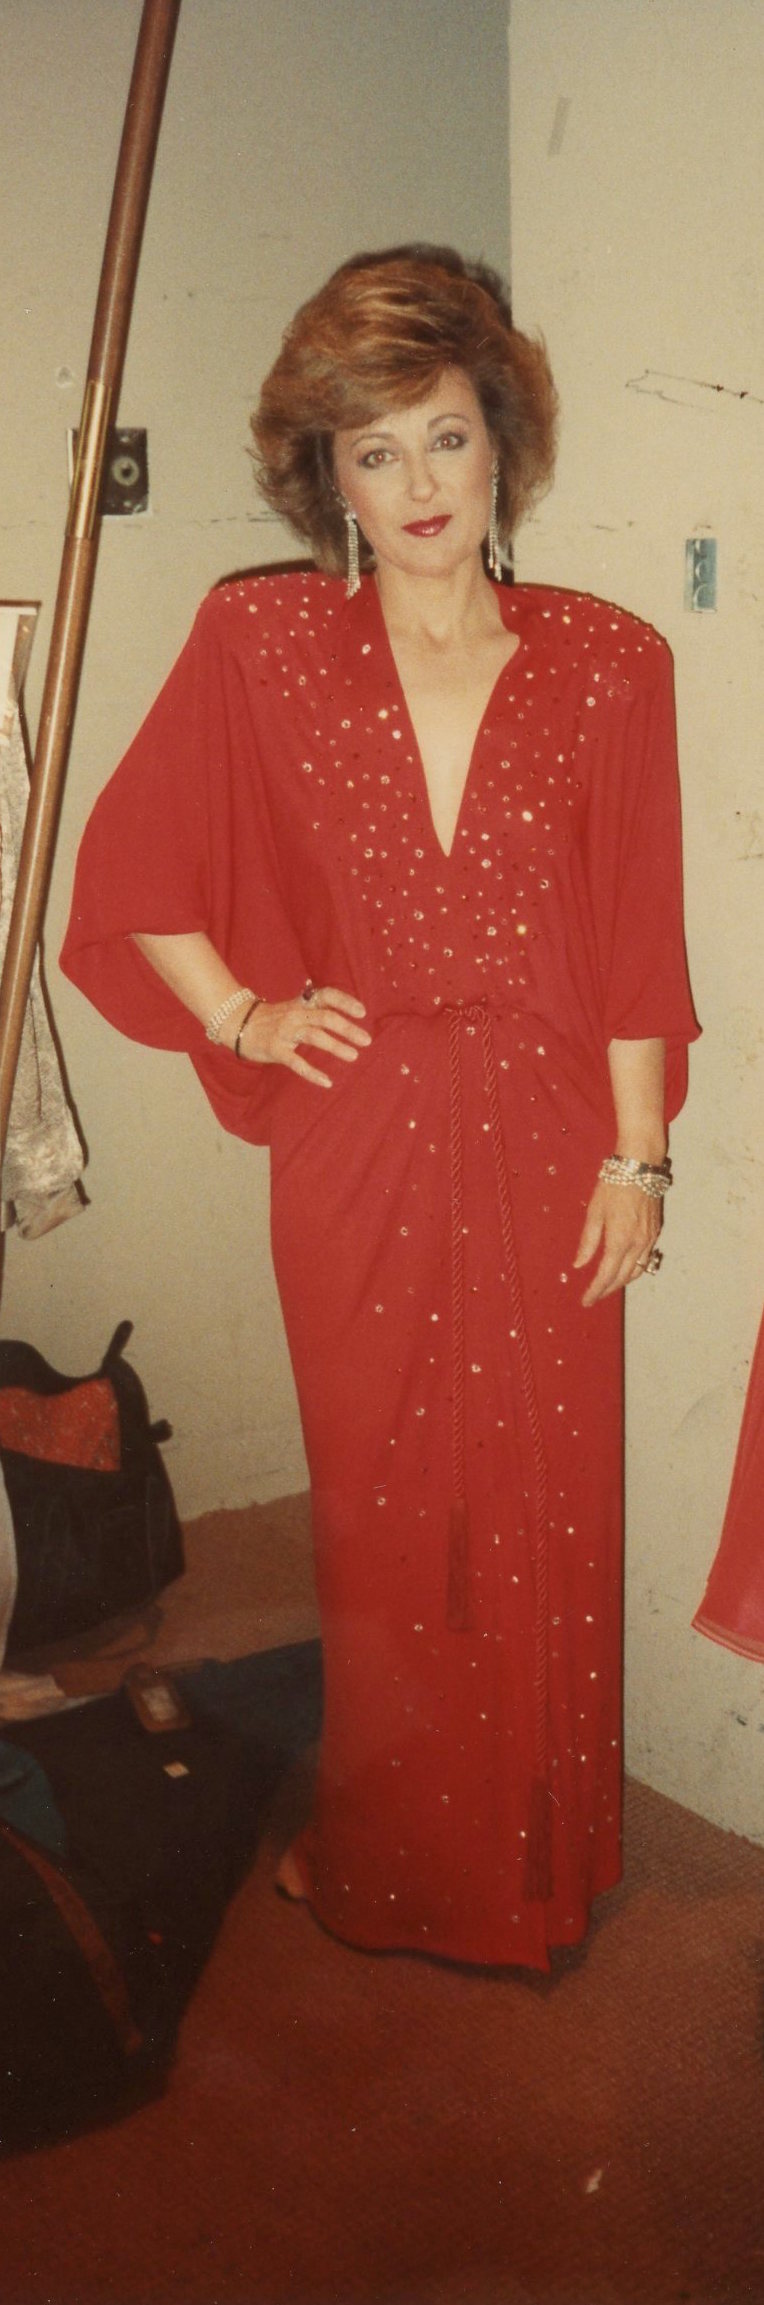 Udana, backstage at the Beverly Wilshire Hotel, 1989, just before performing her one-woman show.